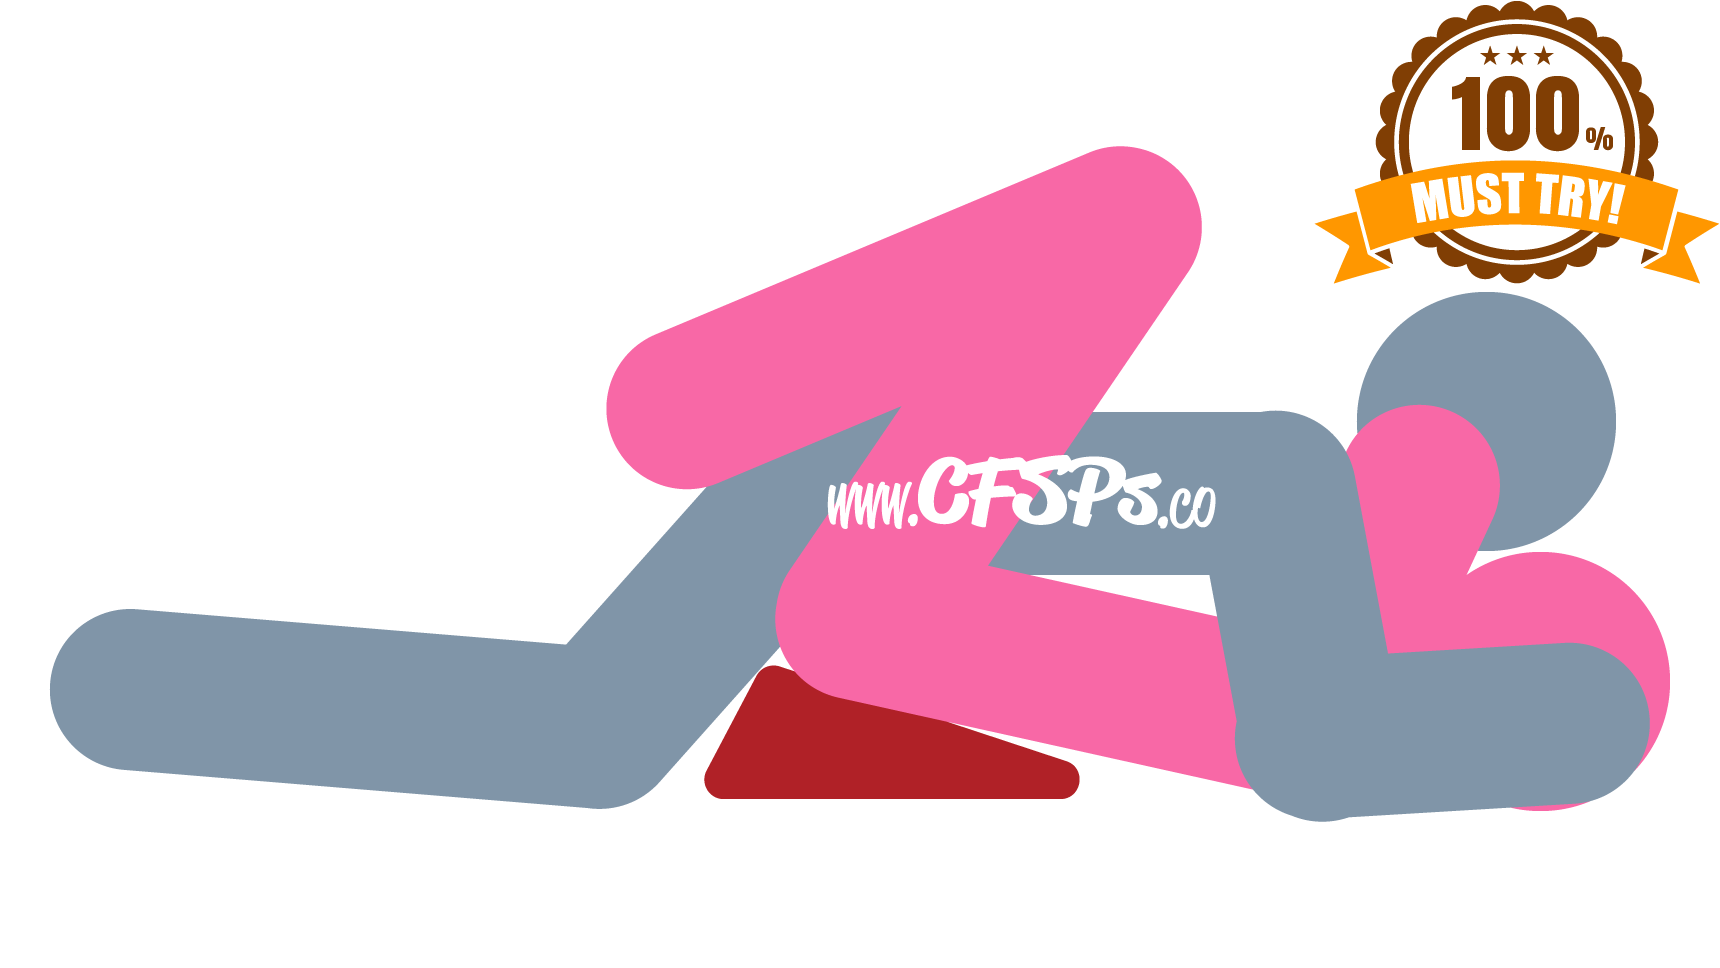 This stick figure image depicts a man and woman having sex in the Adapted Missionary sex position. The woman is lying on her back with a Liberator Wedge sex pillow under her butt, her legs open, bent, and knees halfway to her chest. The man is lying between her legs and supporting his upper body with his elbows near her shoulders.